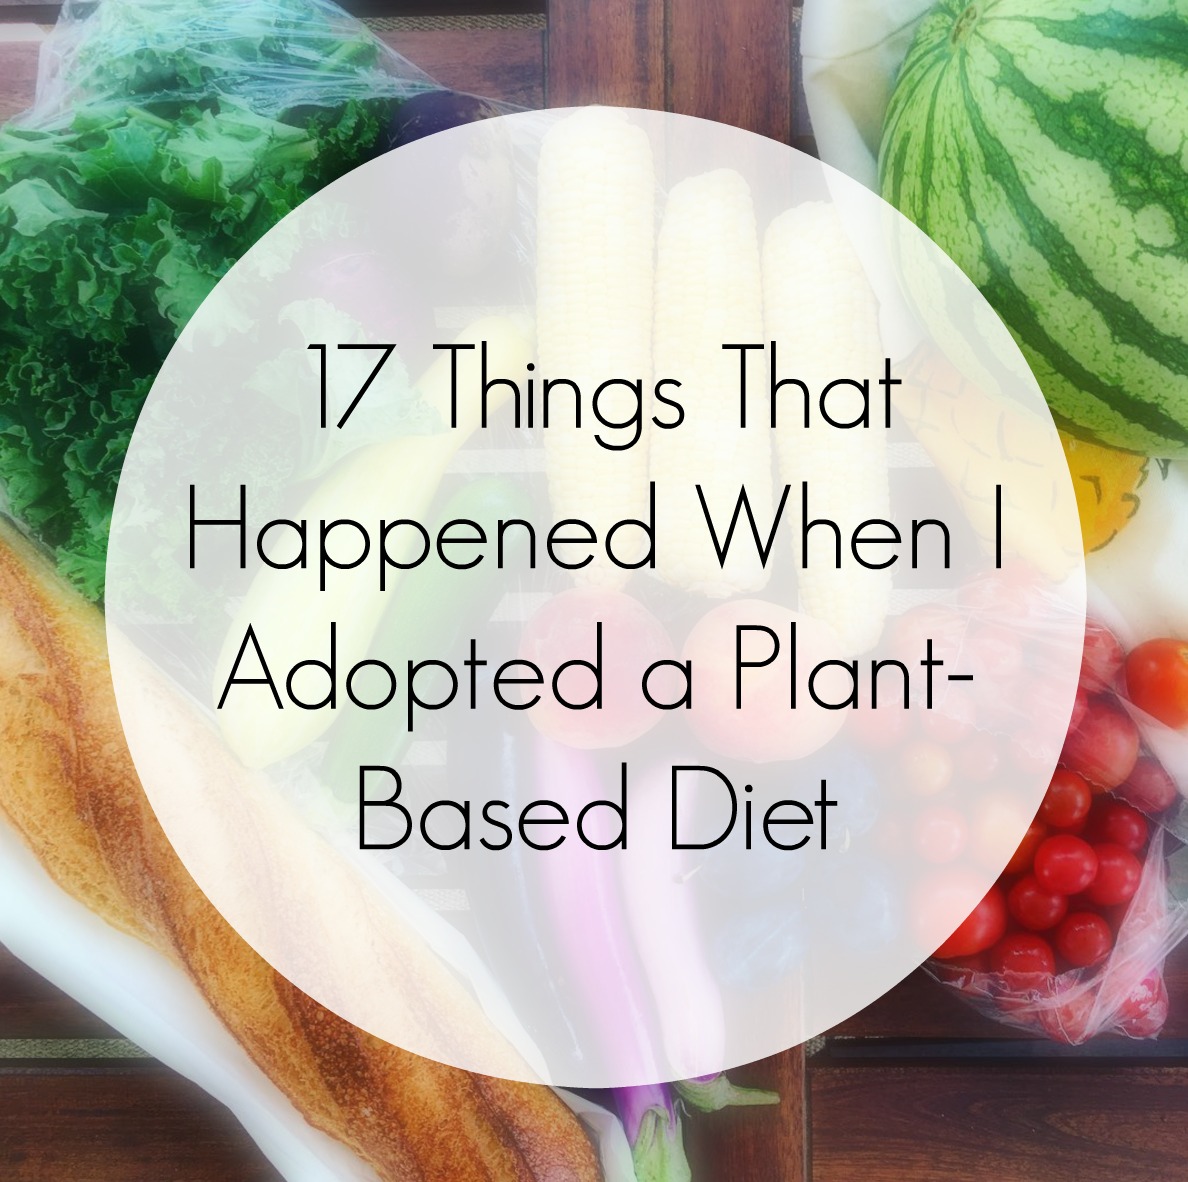 17 Things That Happened When I Adopted a Plant-Based Diet